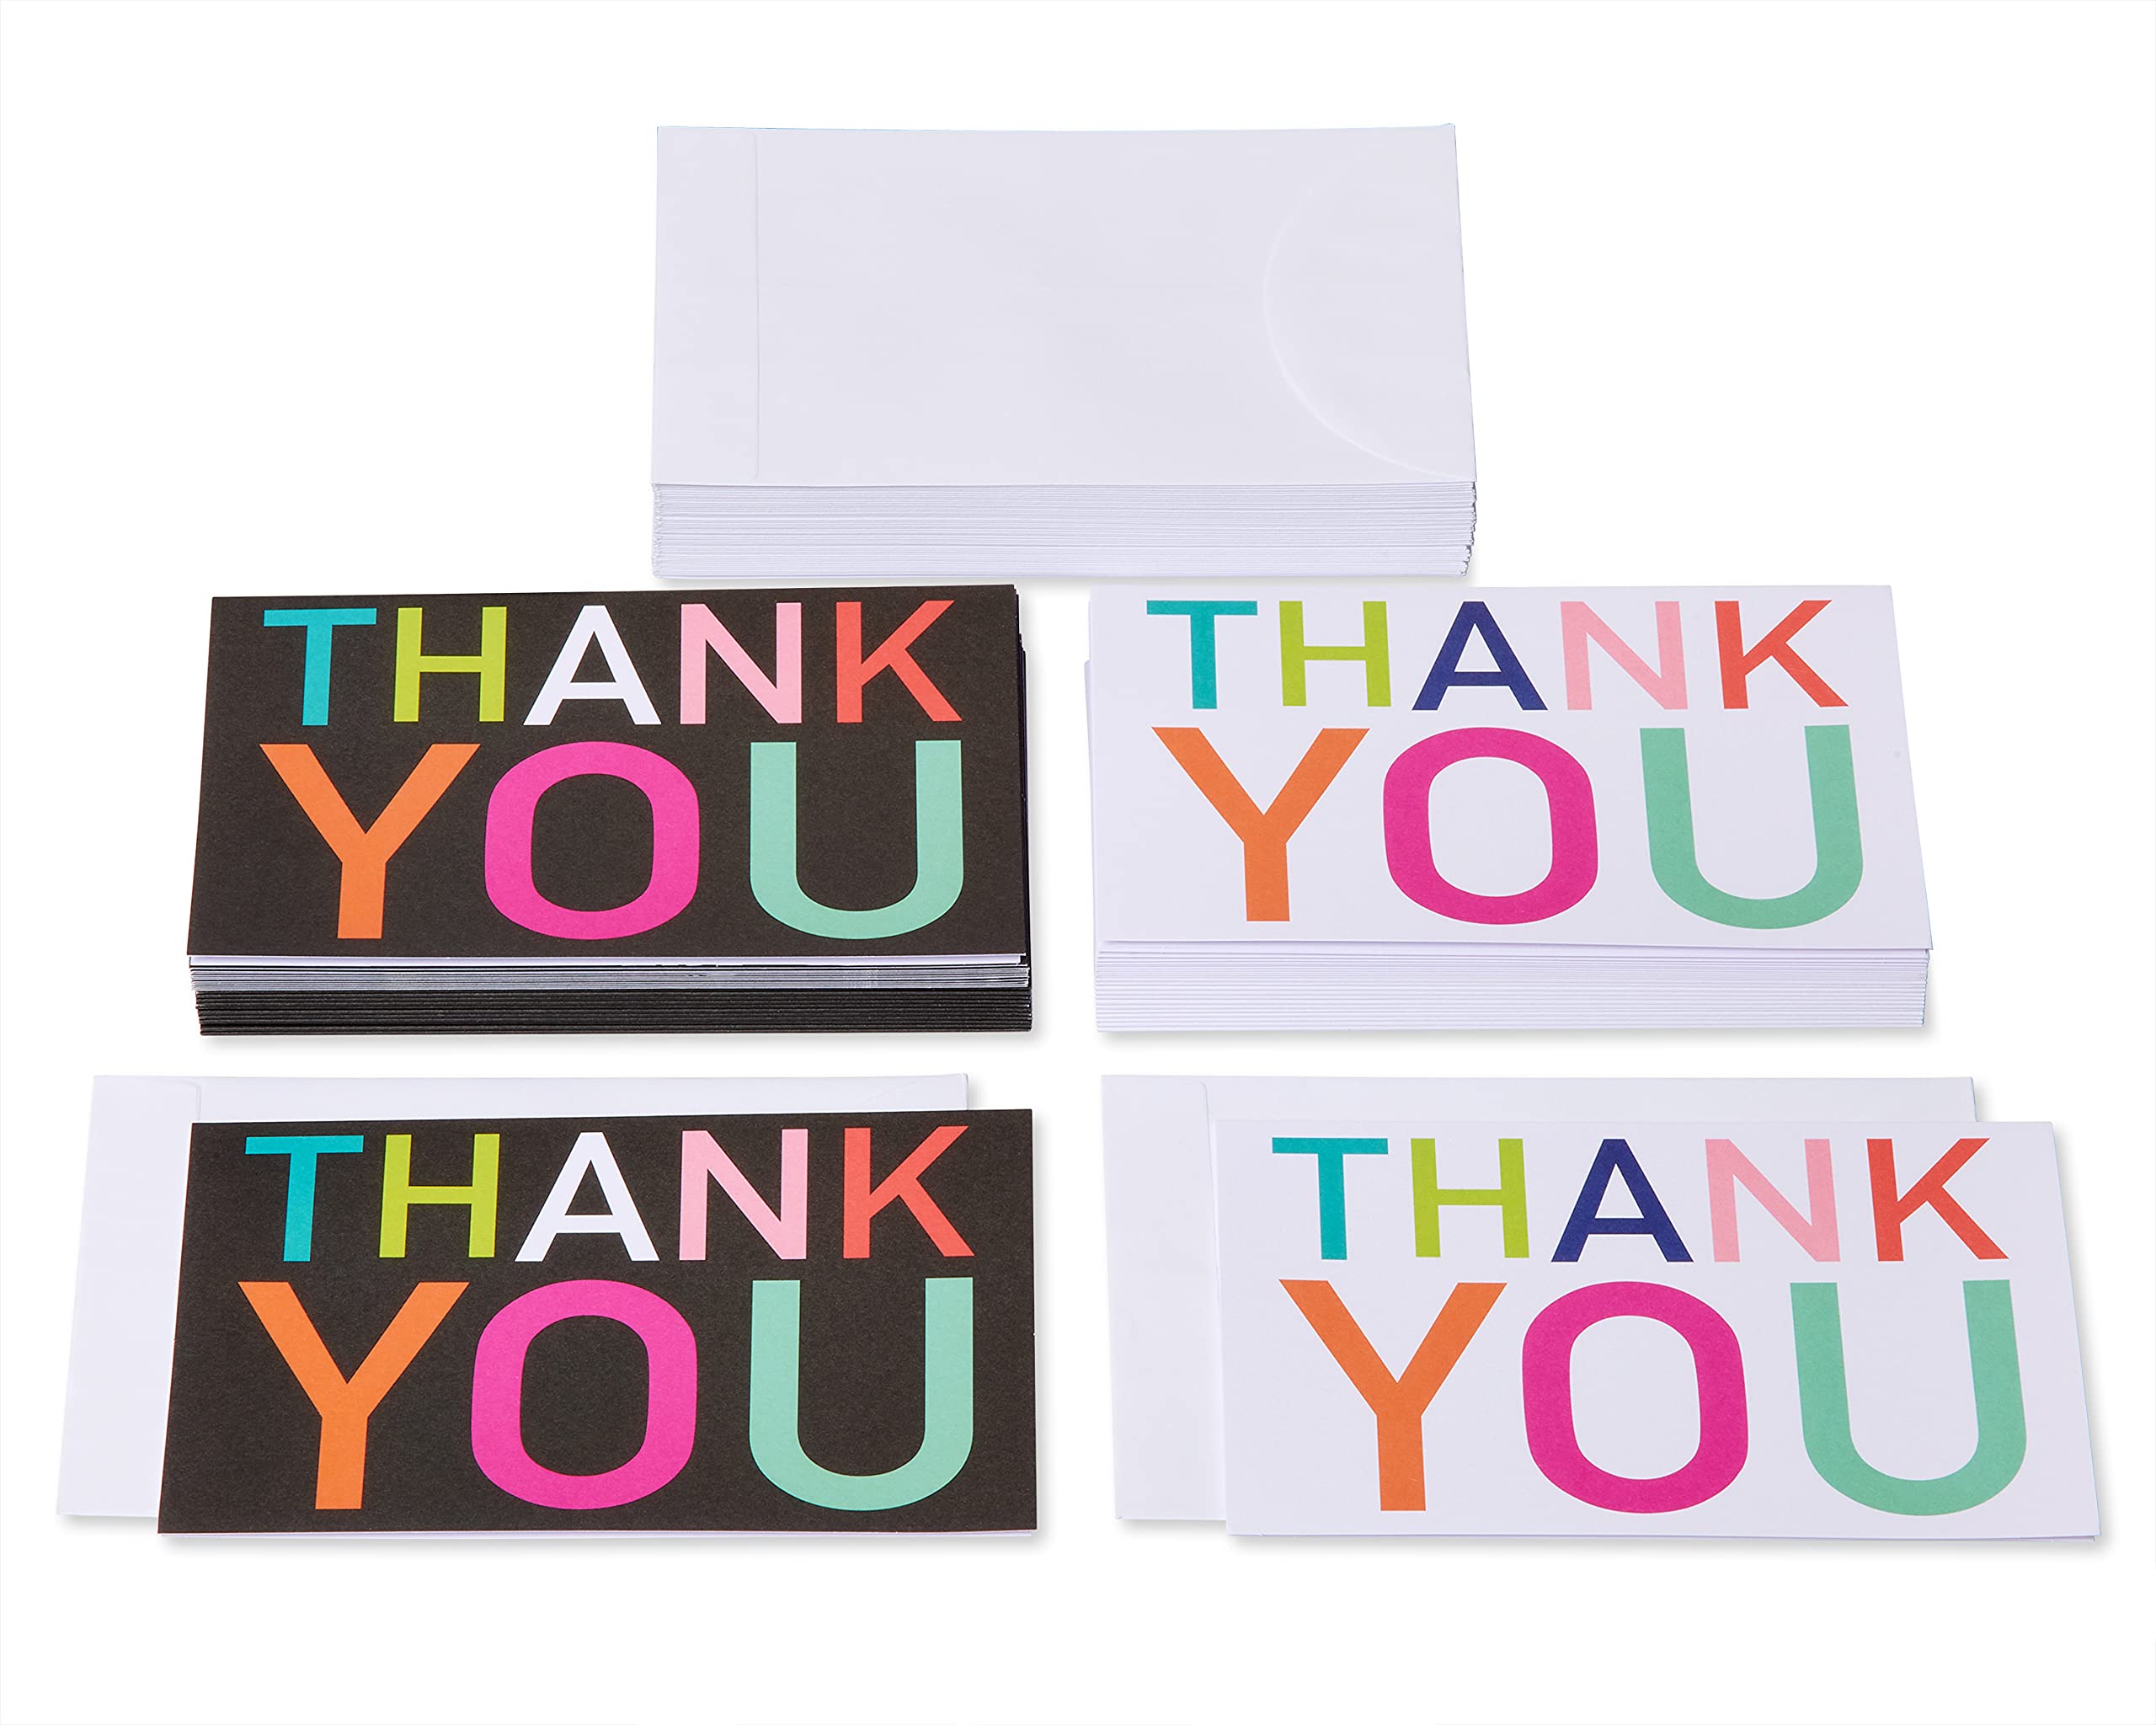 American Greetings Thank You Cards with Envelopes, Multicolored Lettering (48-Count)